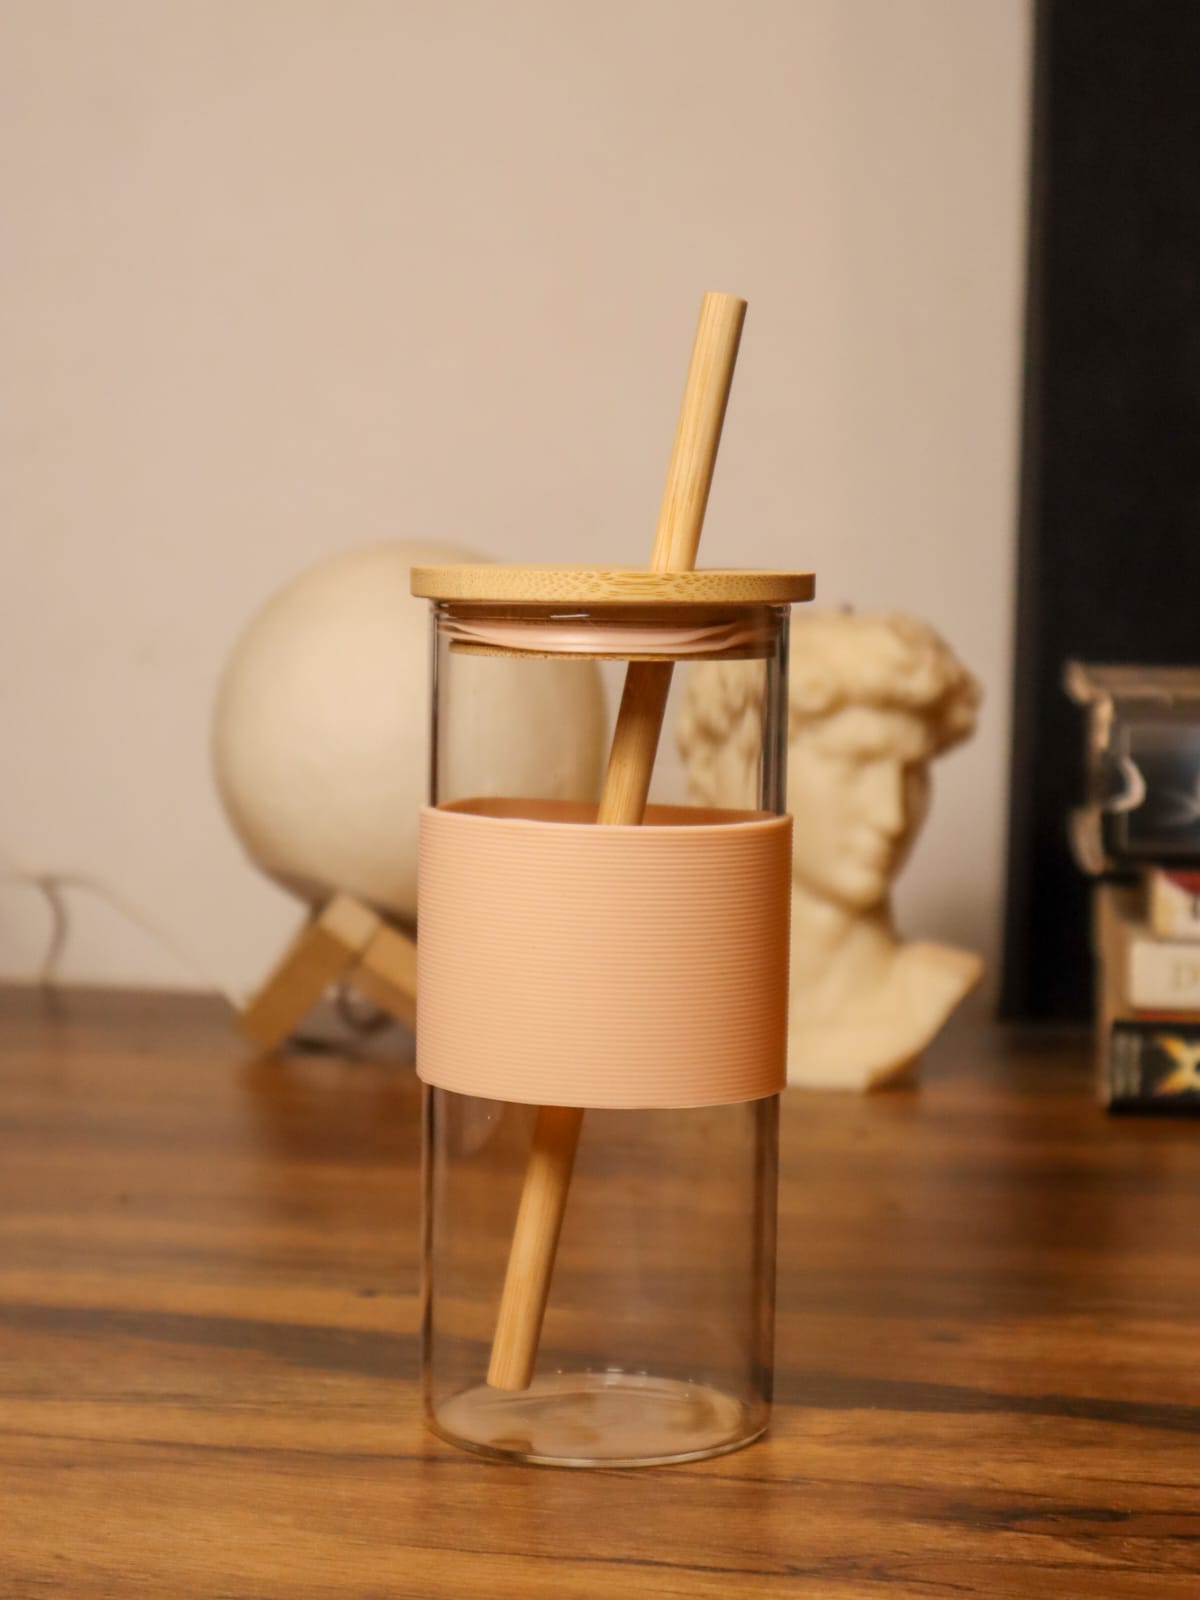 Glass tumbler with bamboo straw and silicone sleeve